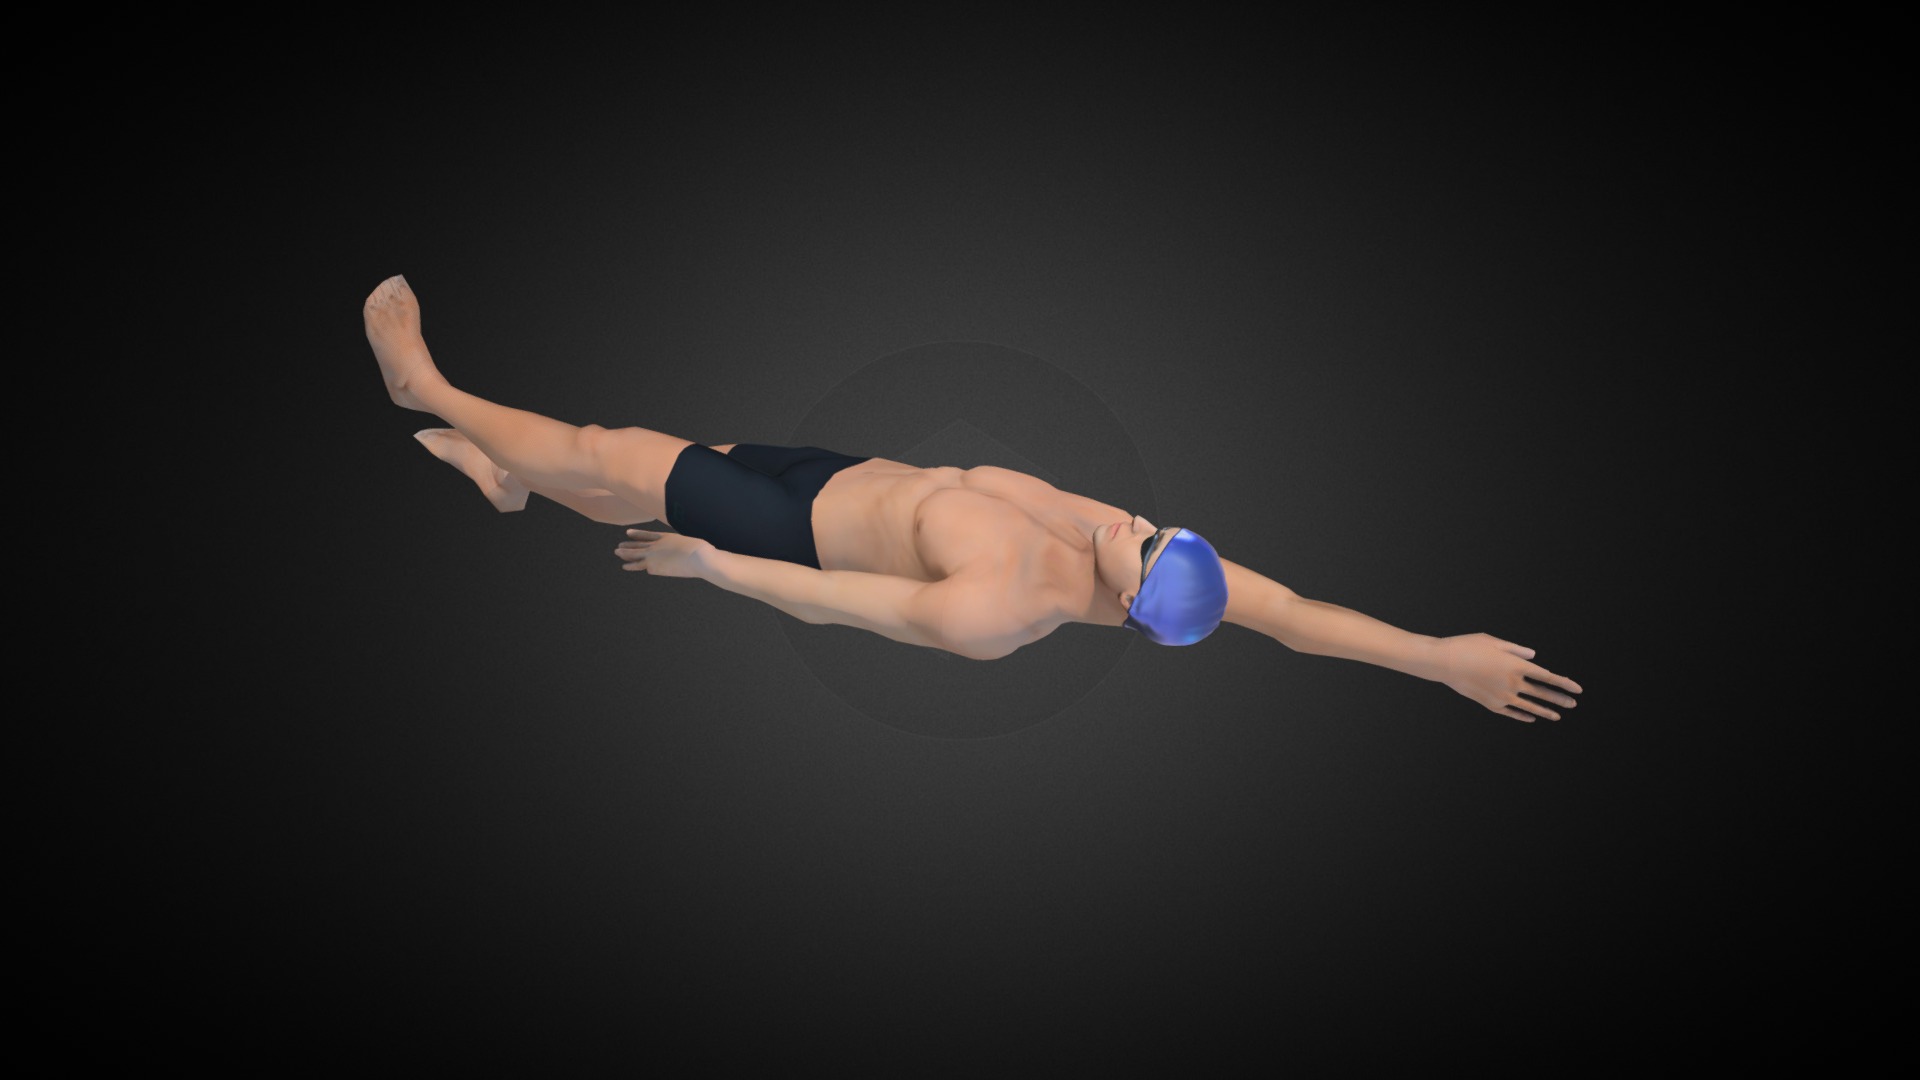 Animation created for Swimming school trainer.
http://szkola-plywania.com/ - Classic Swimming Animation - Buy Royalty Free 3D model by danielmikulik 3d model